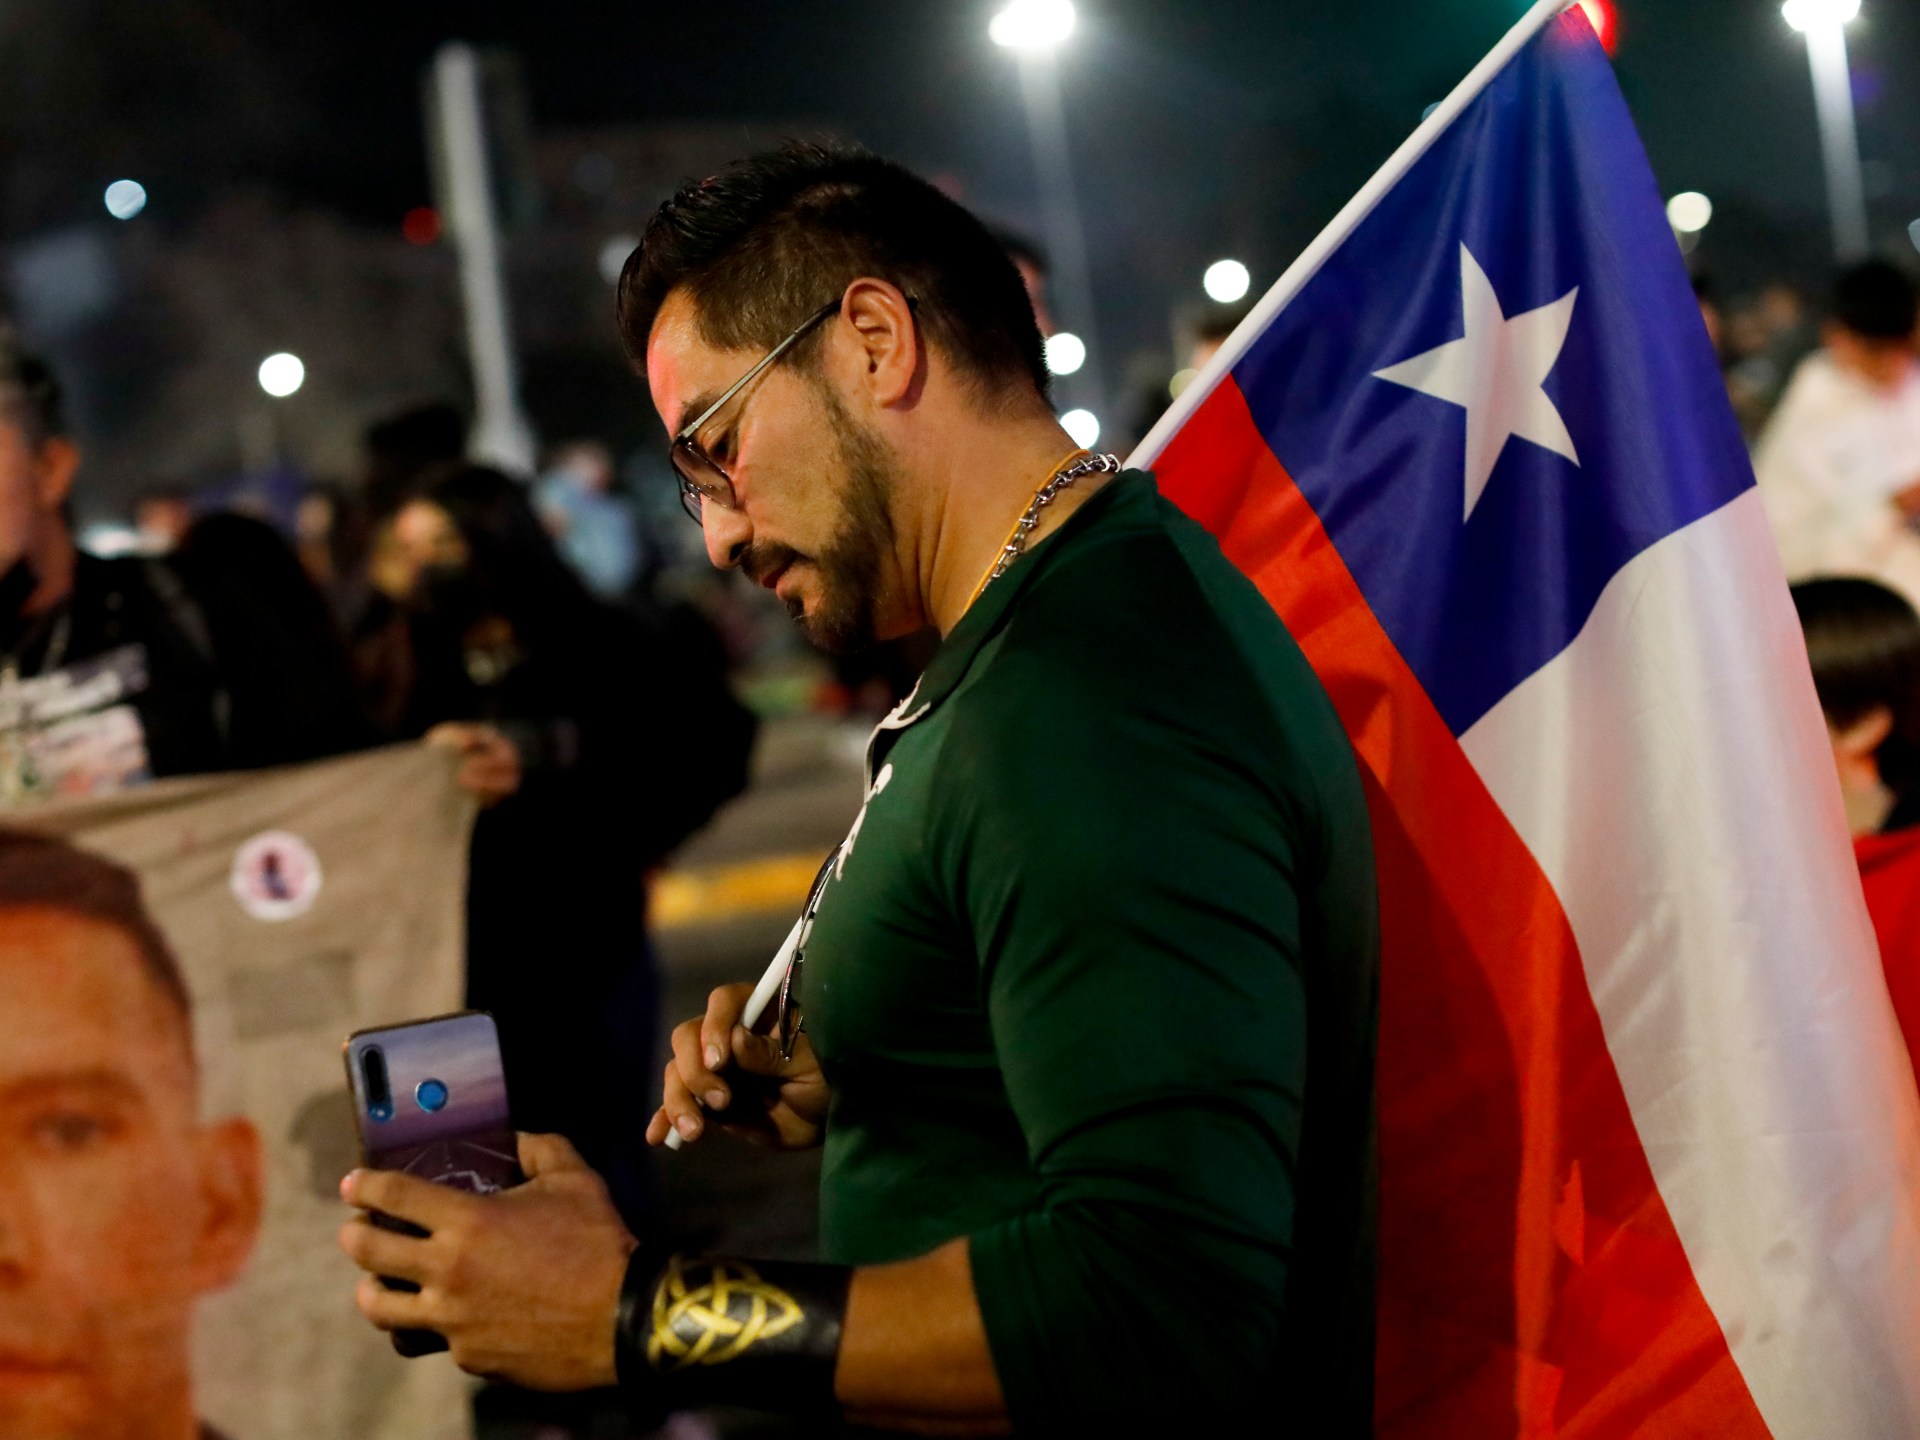 ‘Sense of abandonment’ as Chile rejects new constitution